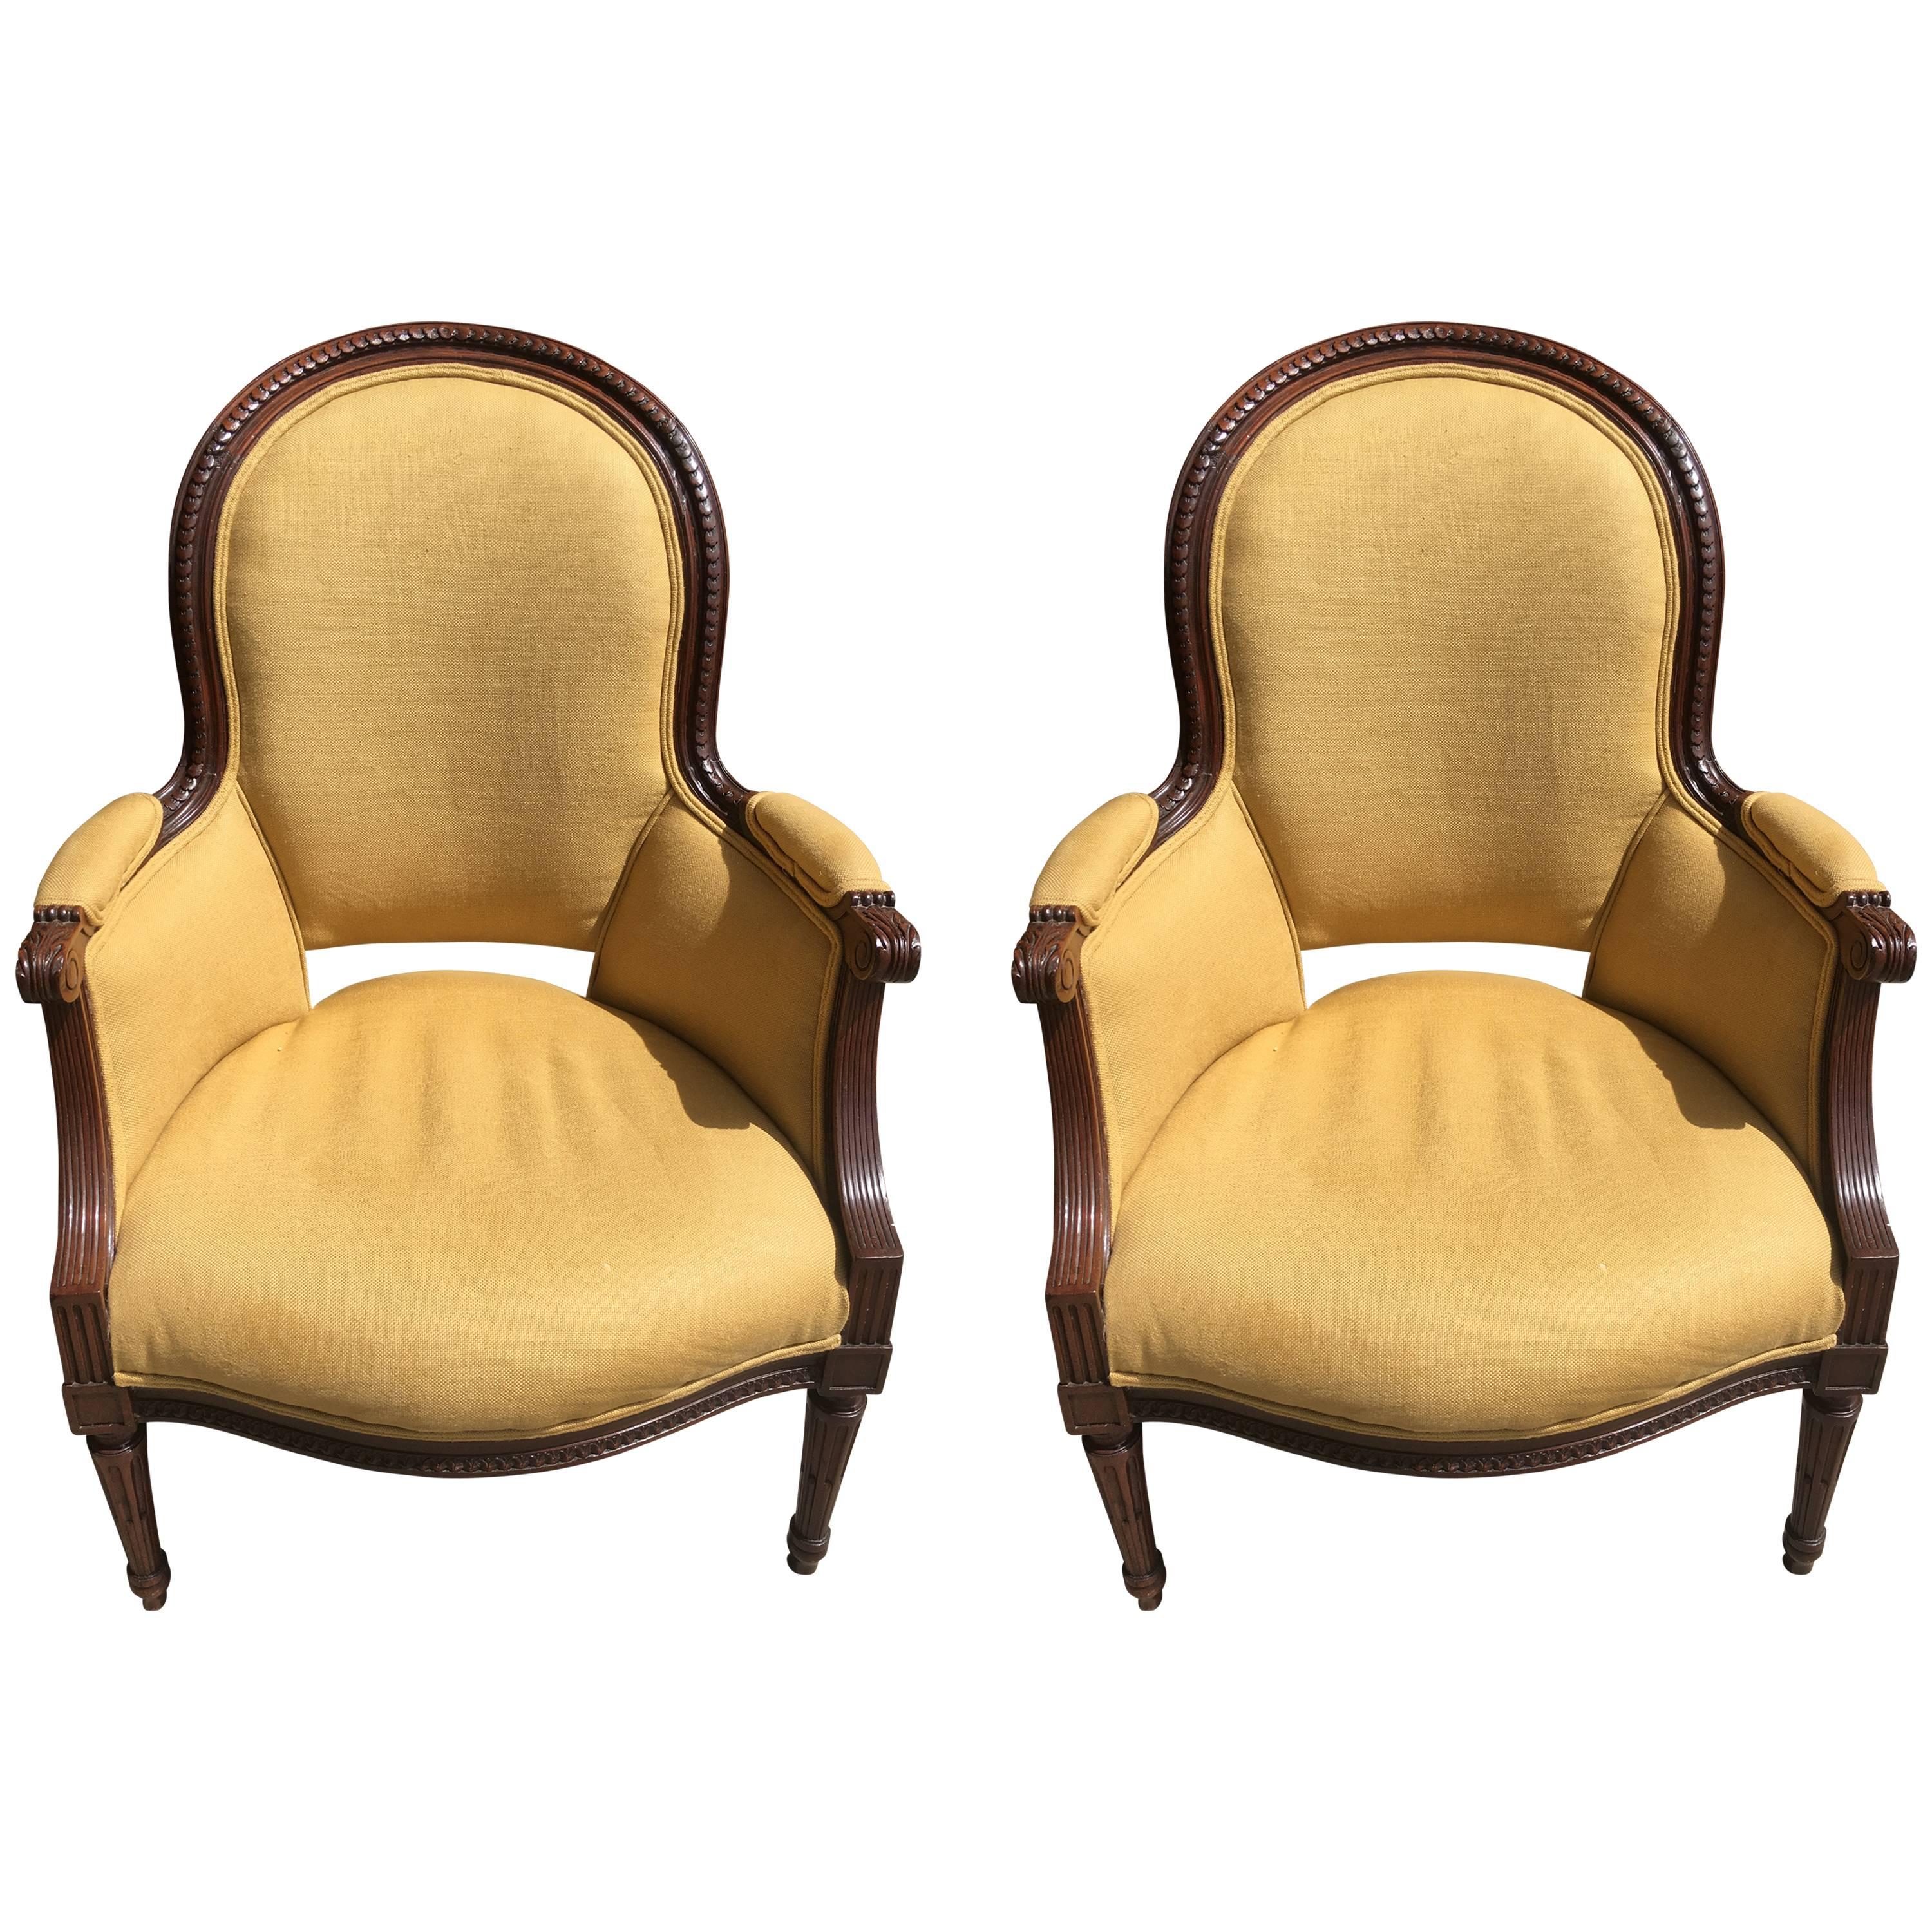 Early 19th Century French Walnut Bergere Chairs